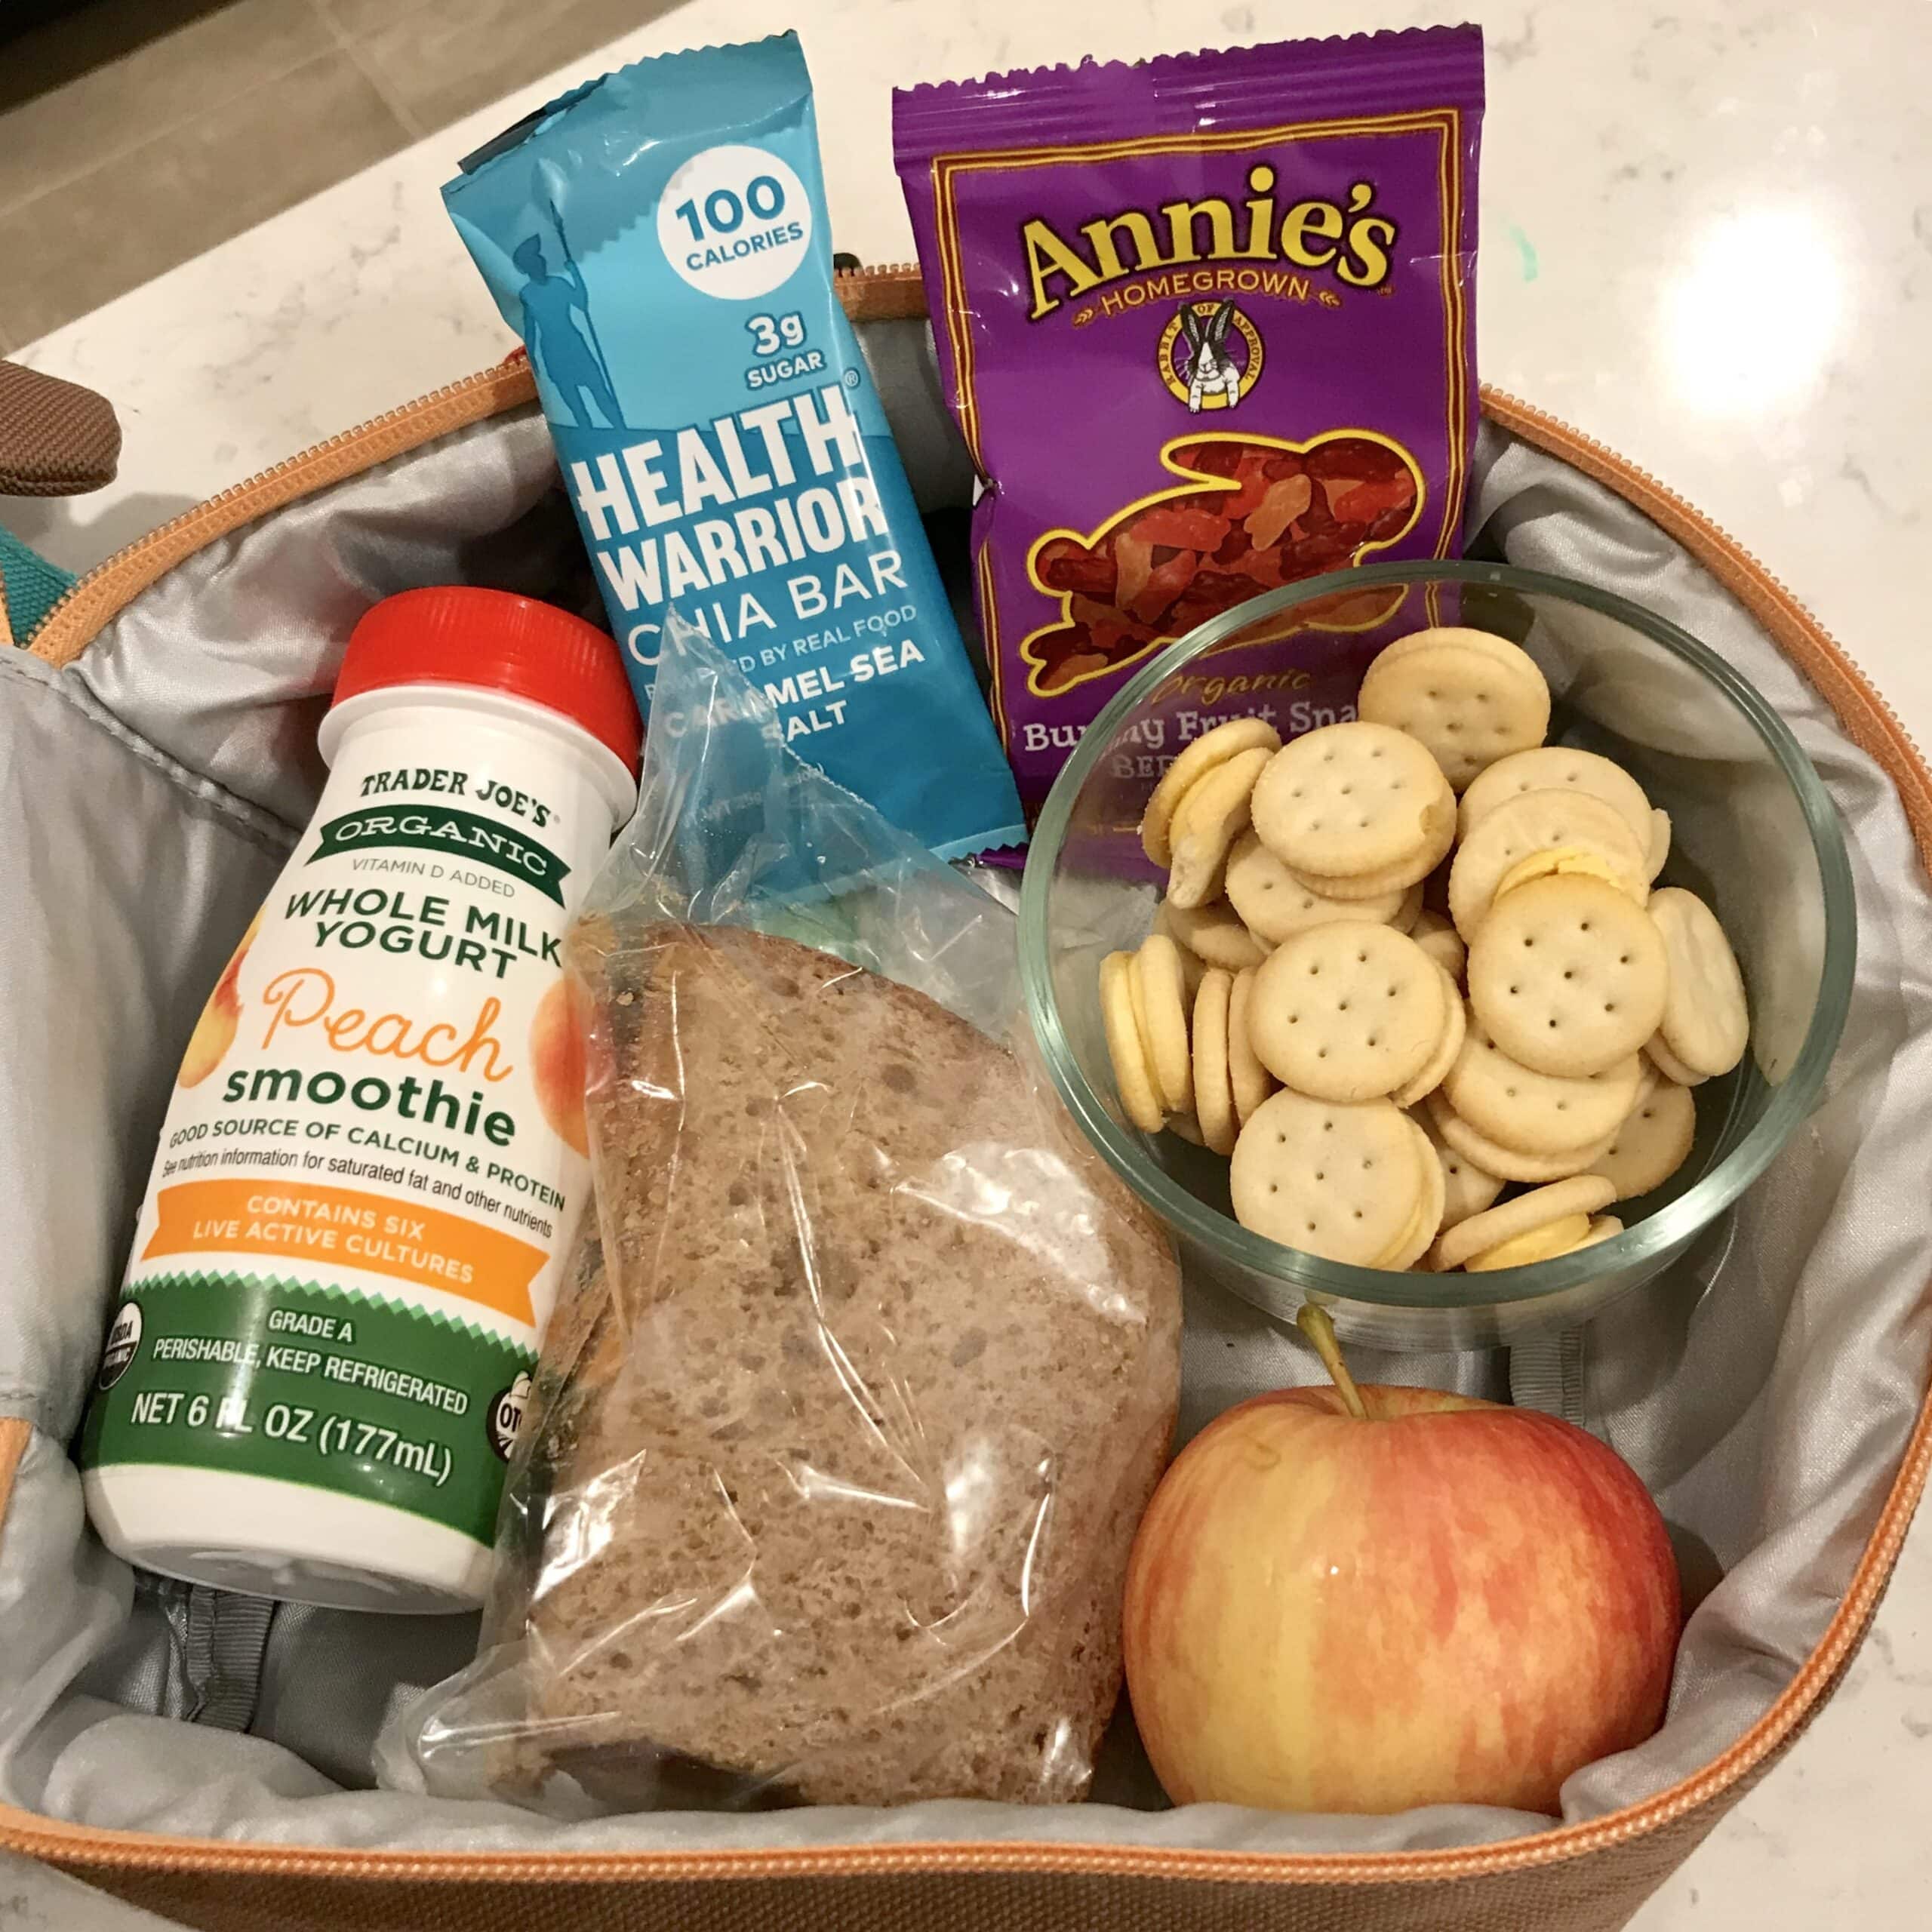 A lunchbox with healthy foods options from Trader Joe's